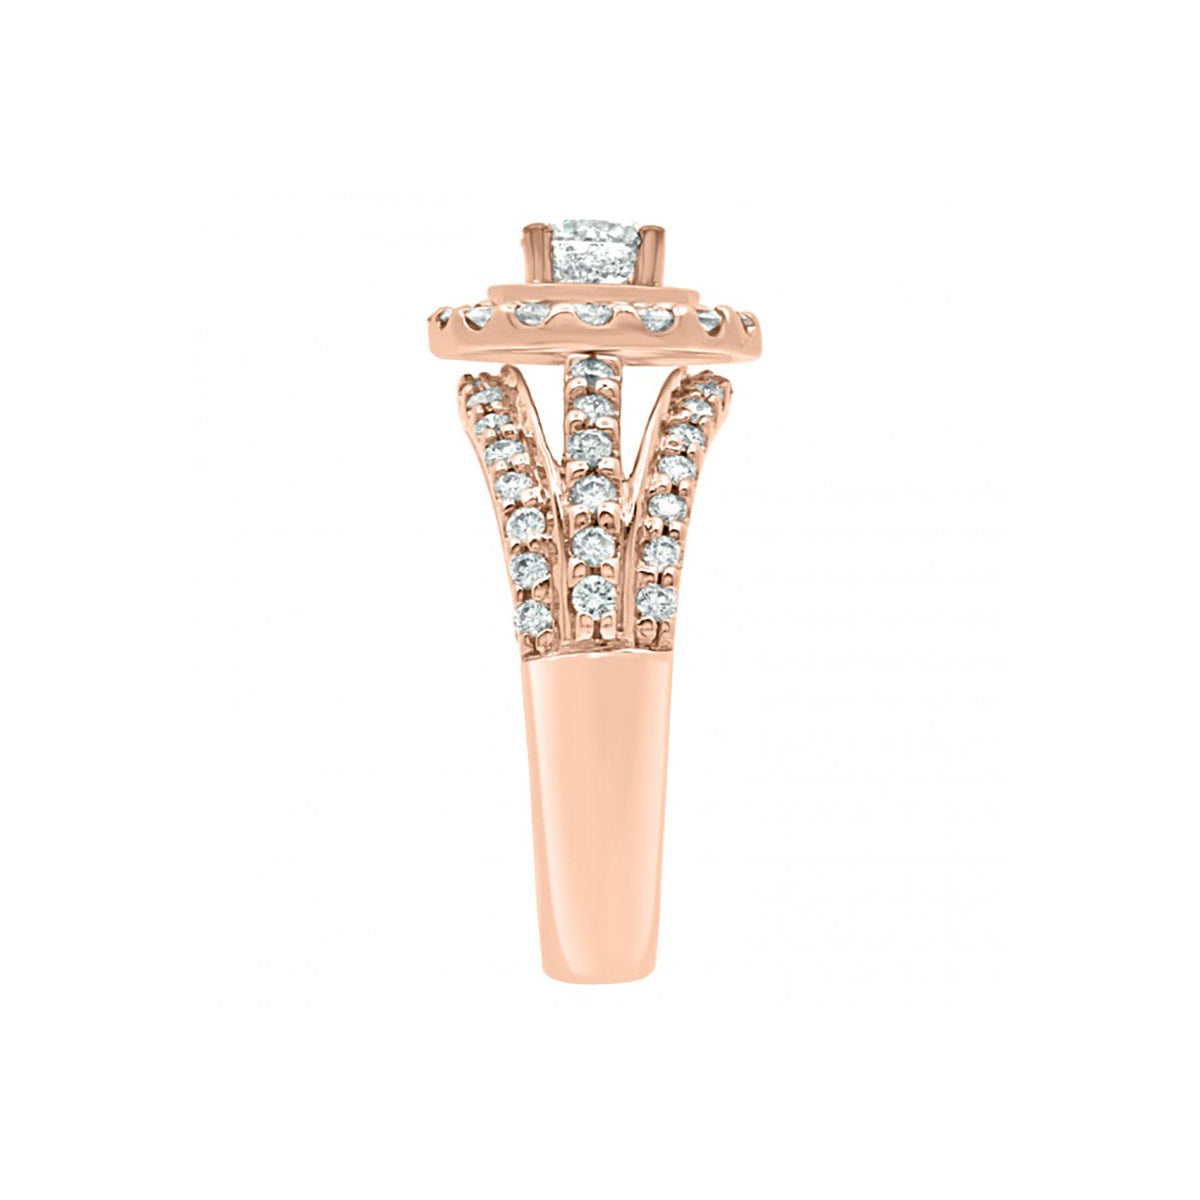 Three Band Engagement Ring in rose gold viewed from a side angle